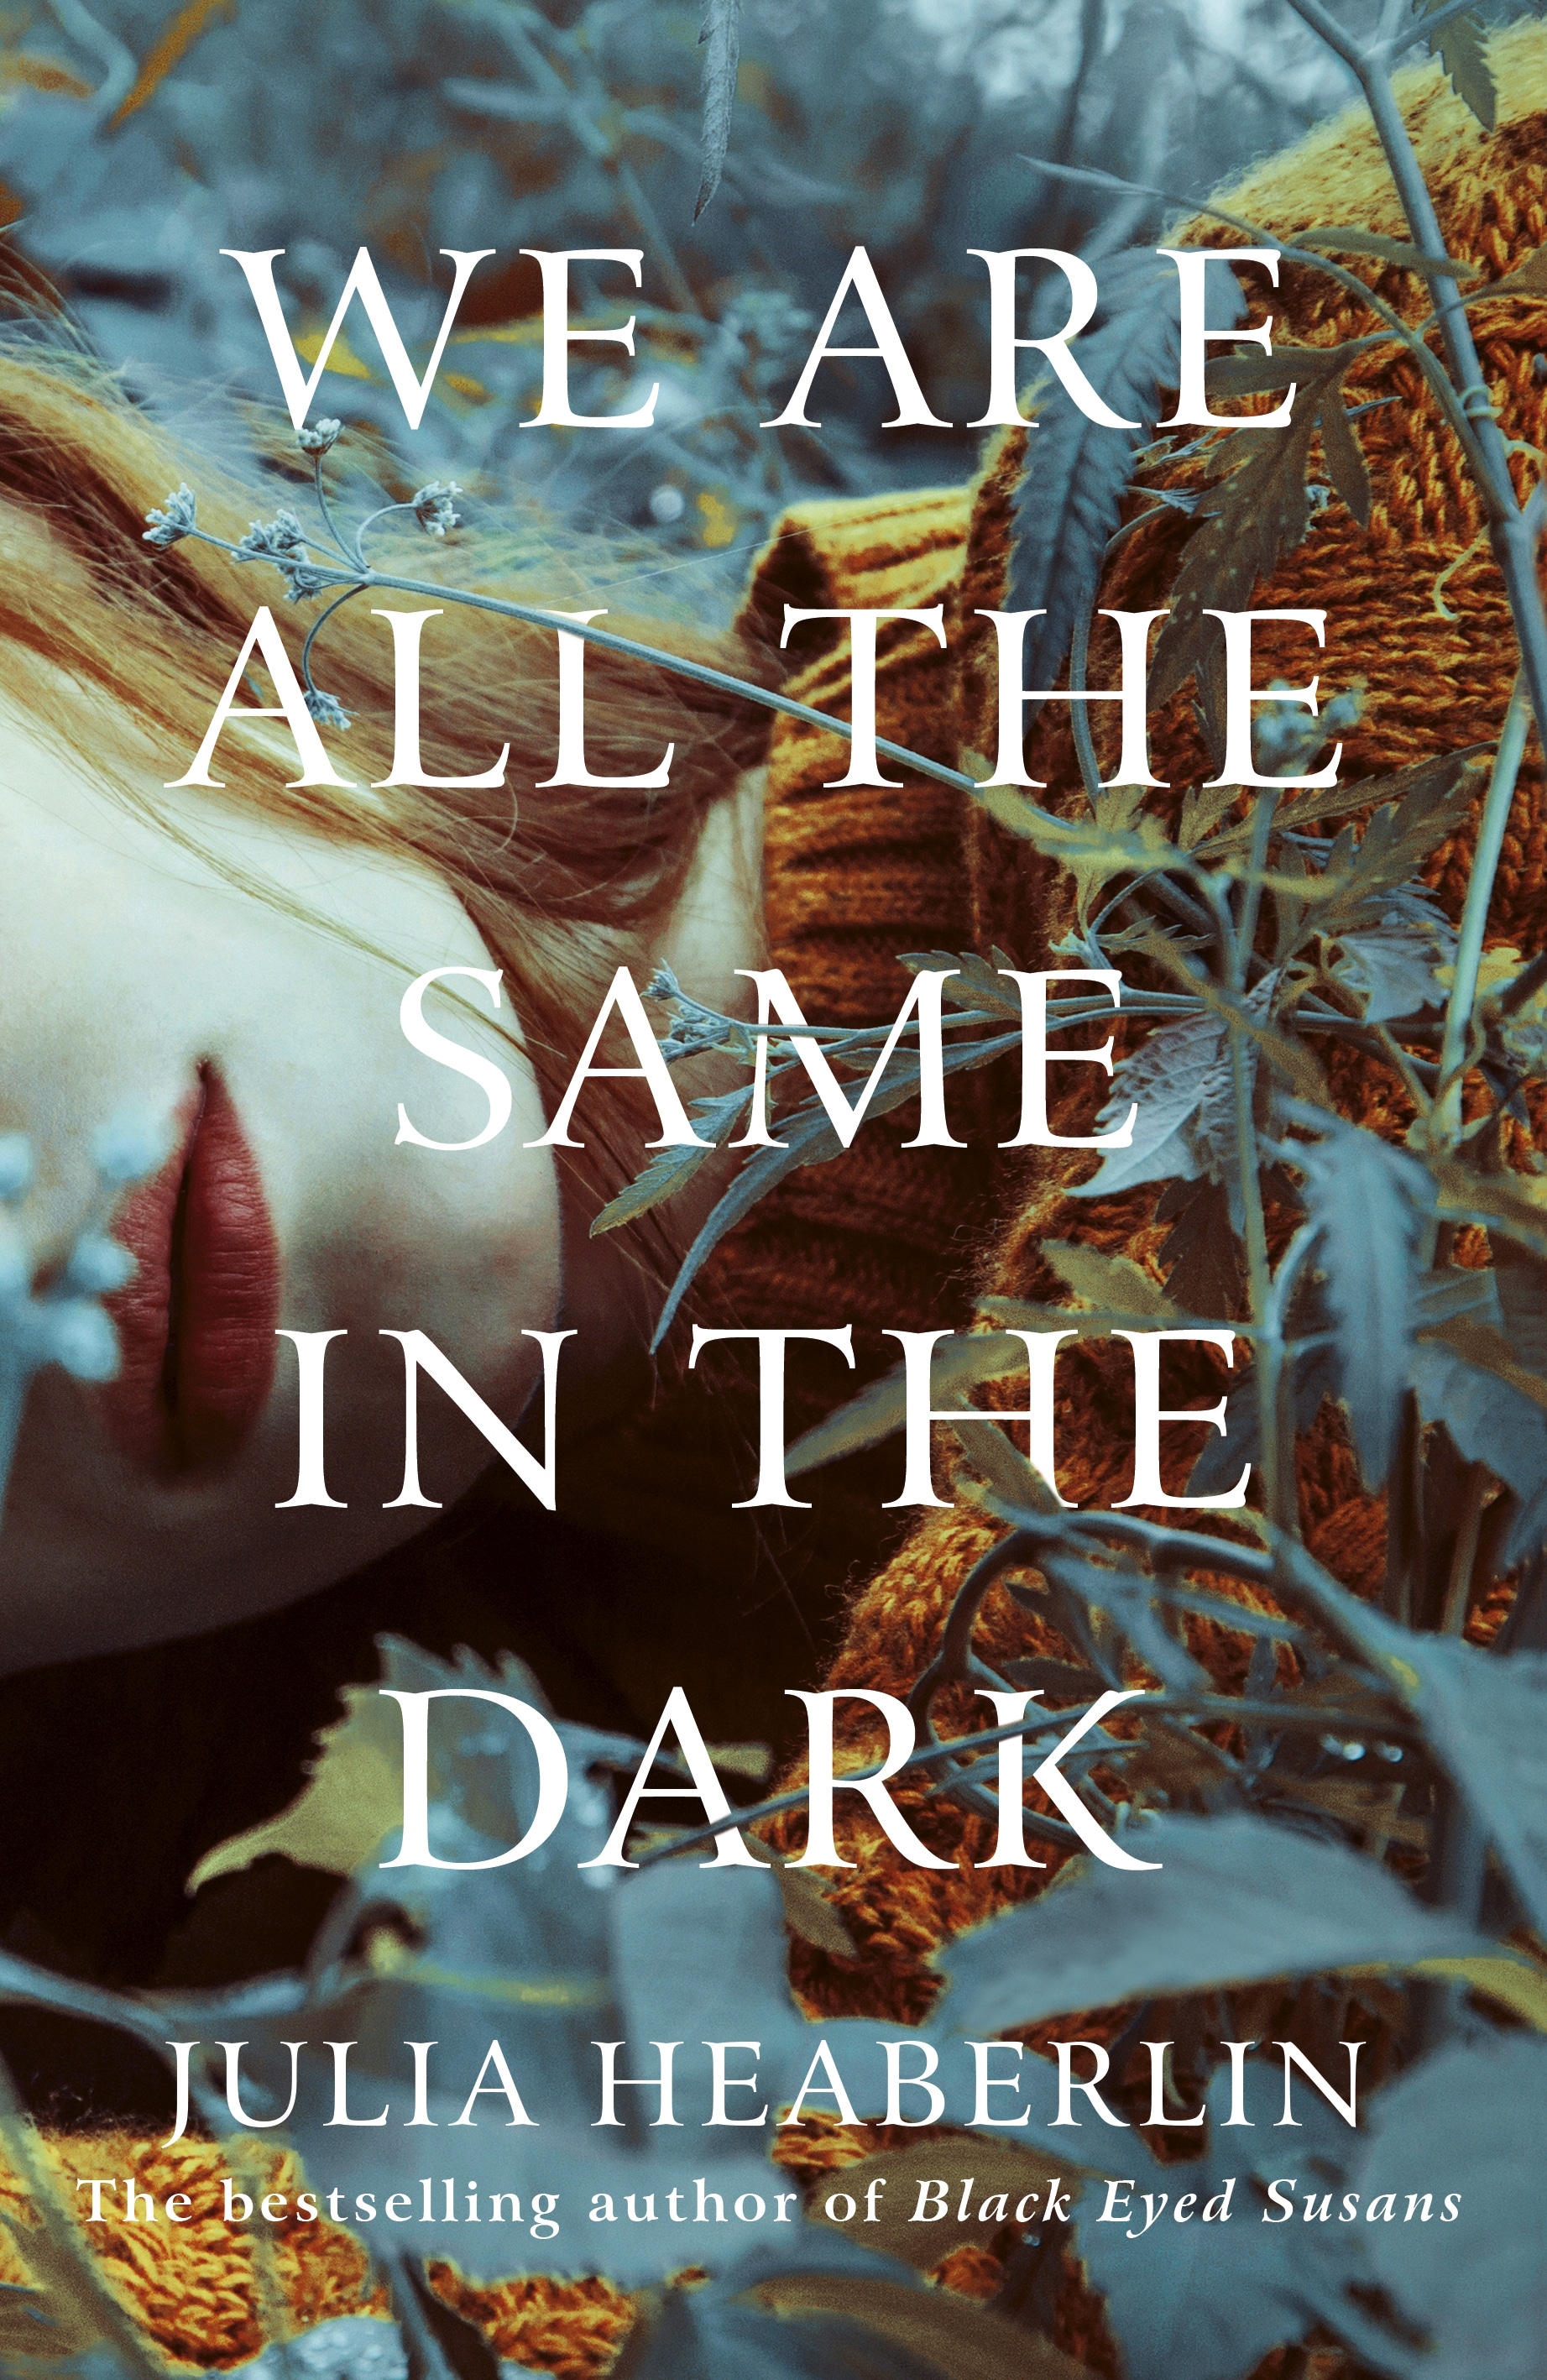 Book “We Are All the Same in the Dark” by Julia Heaberlin — August 6, 2020